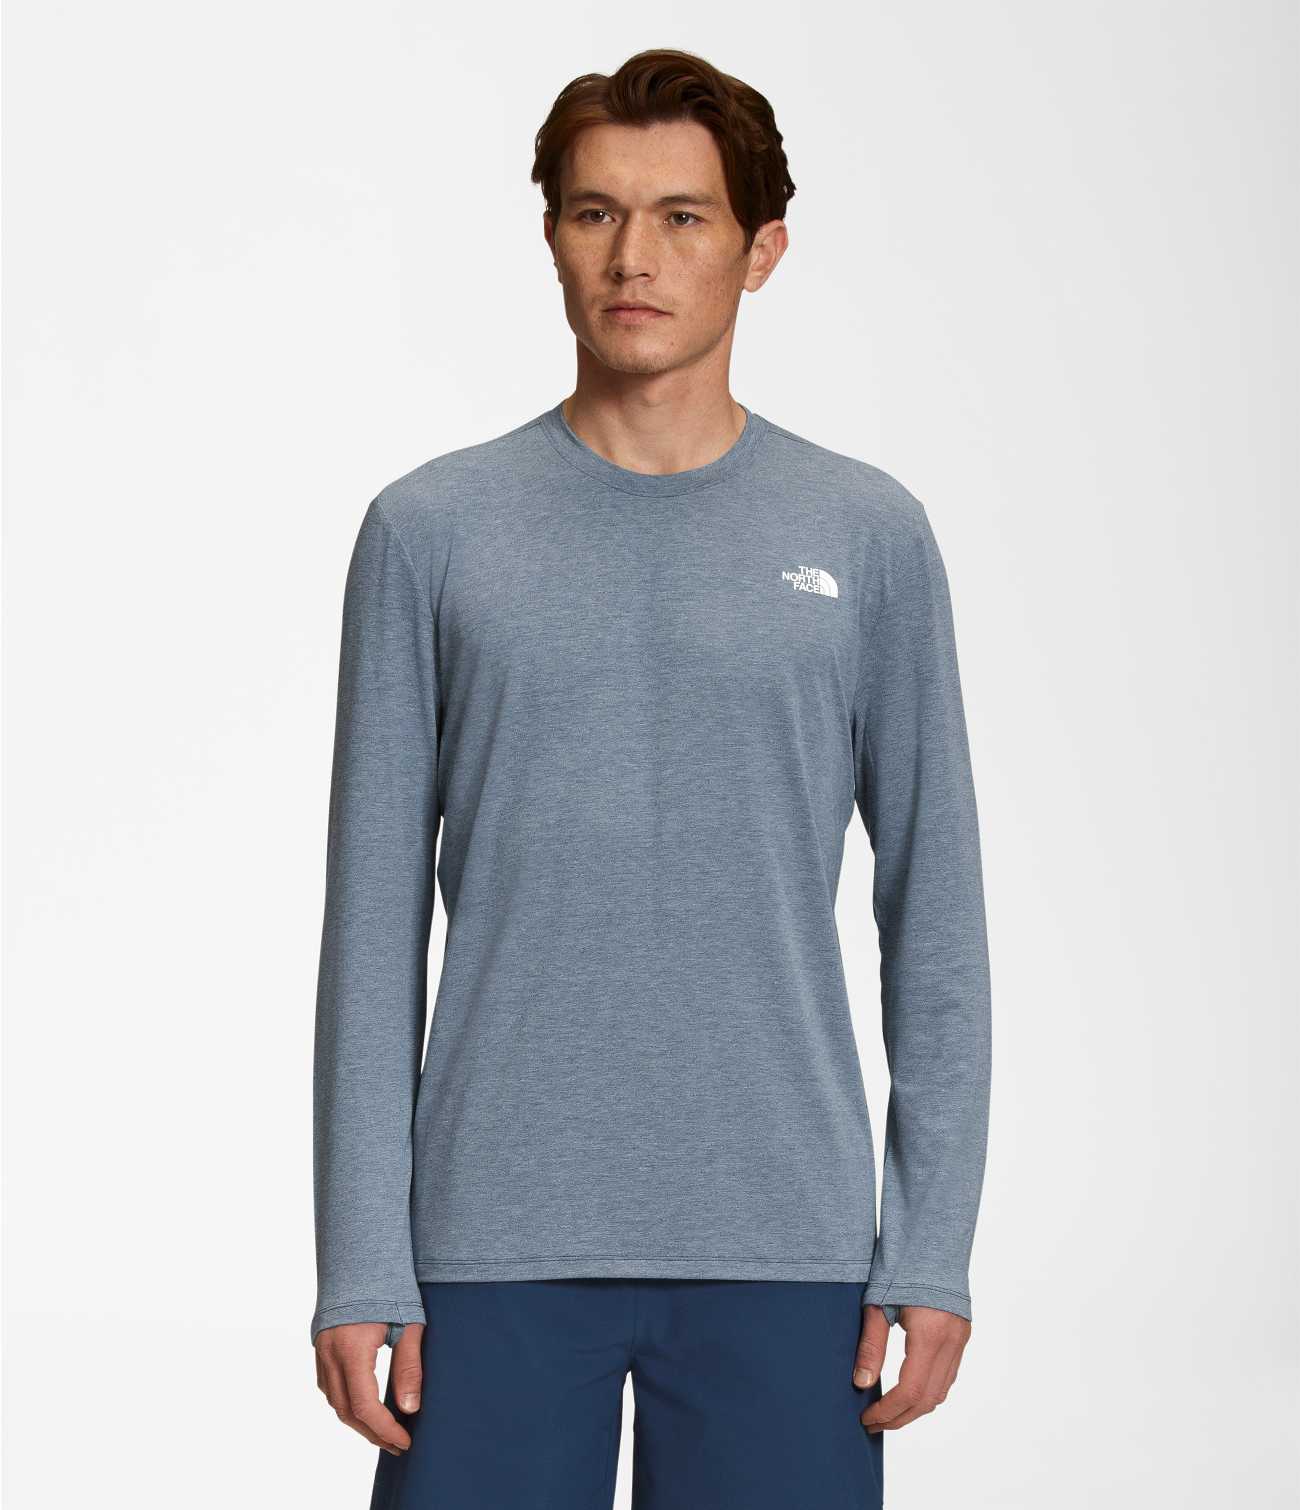 MEN'S WANDER L/S | The North Face | The North Face Renewed